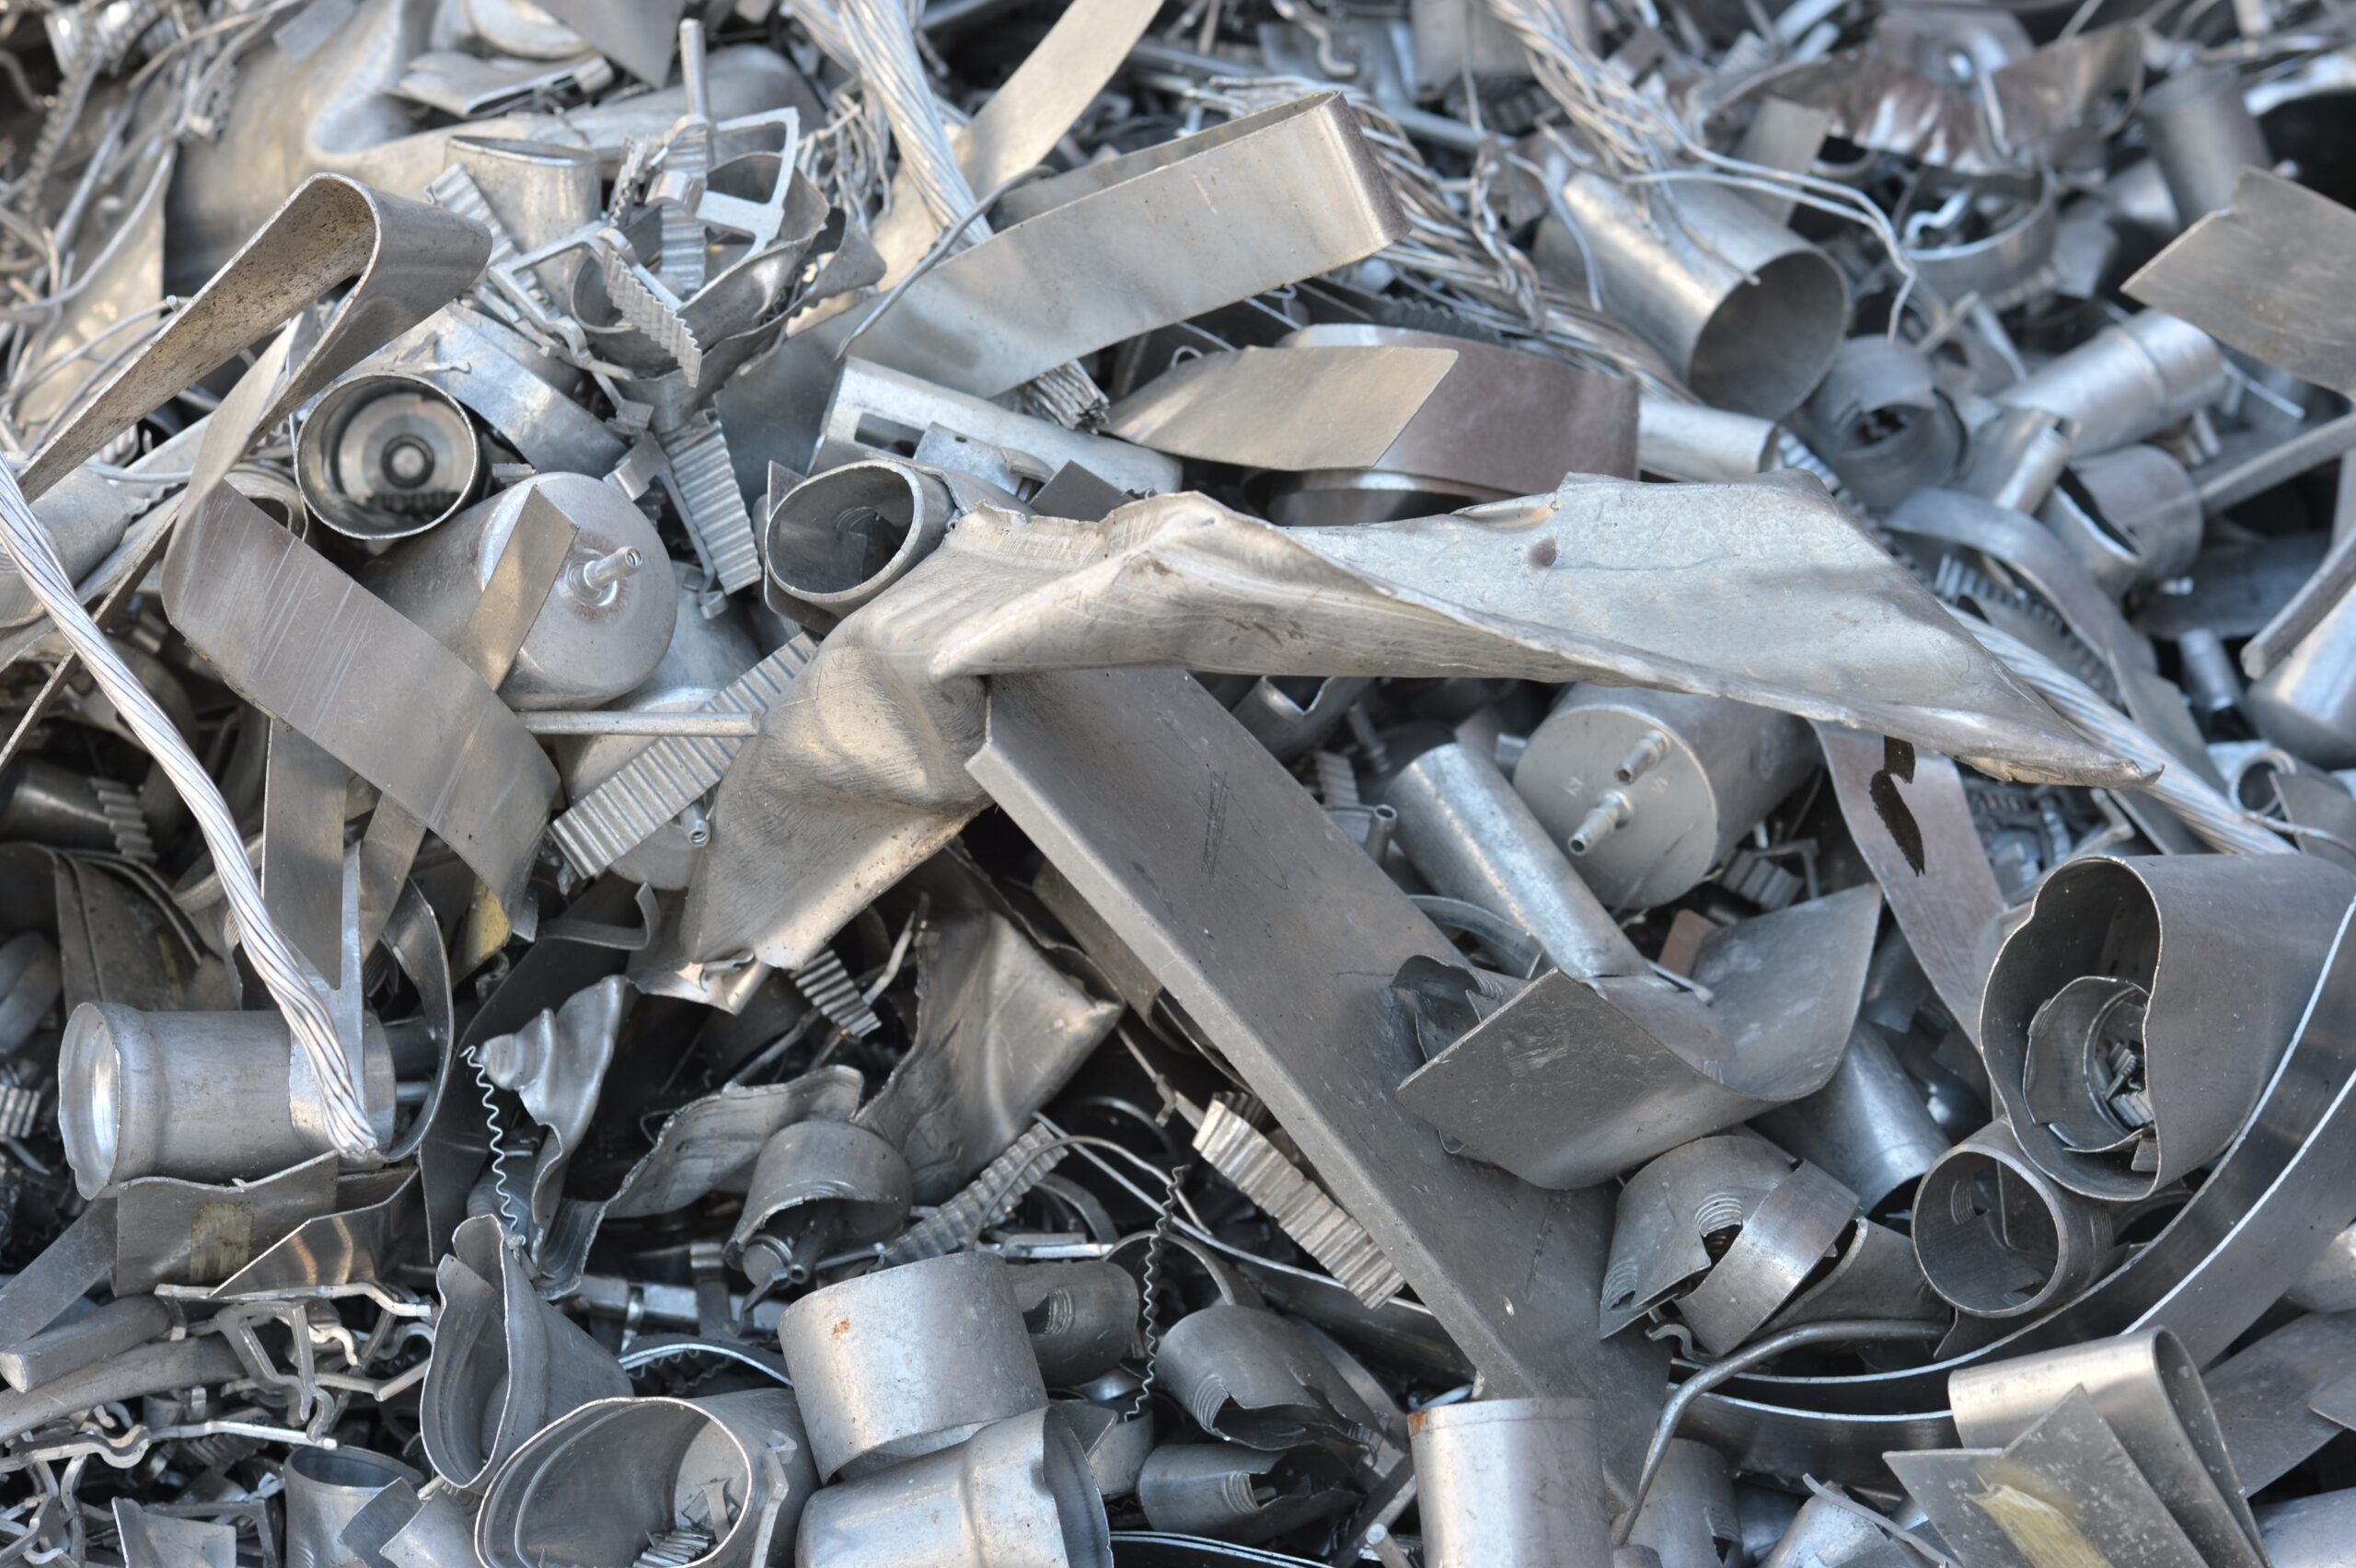 Can Aluminium Be Recycled? Find Out What the Experts Say